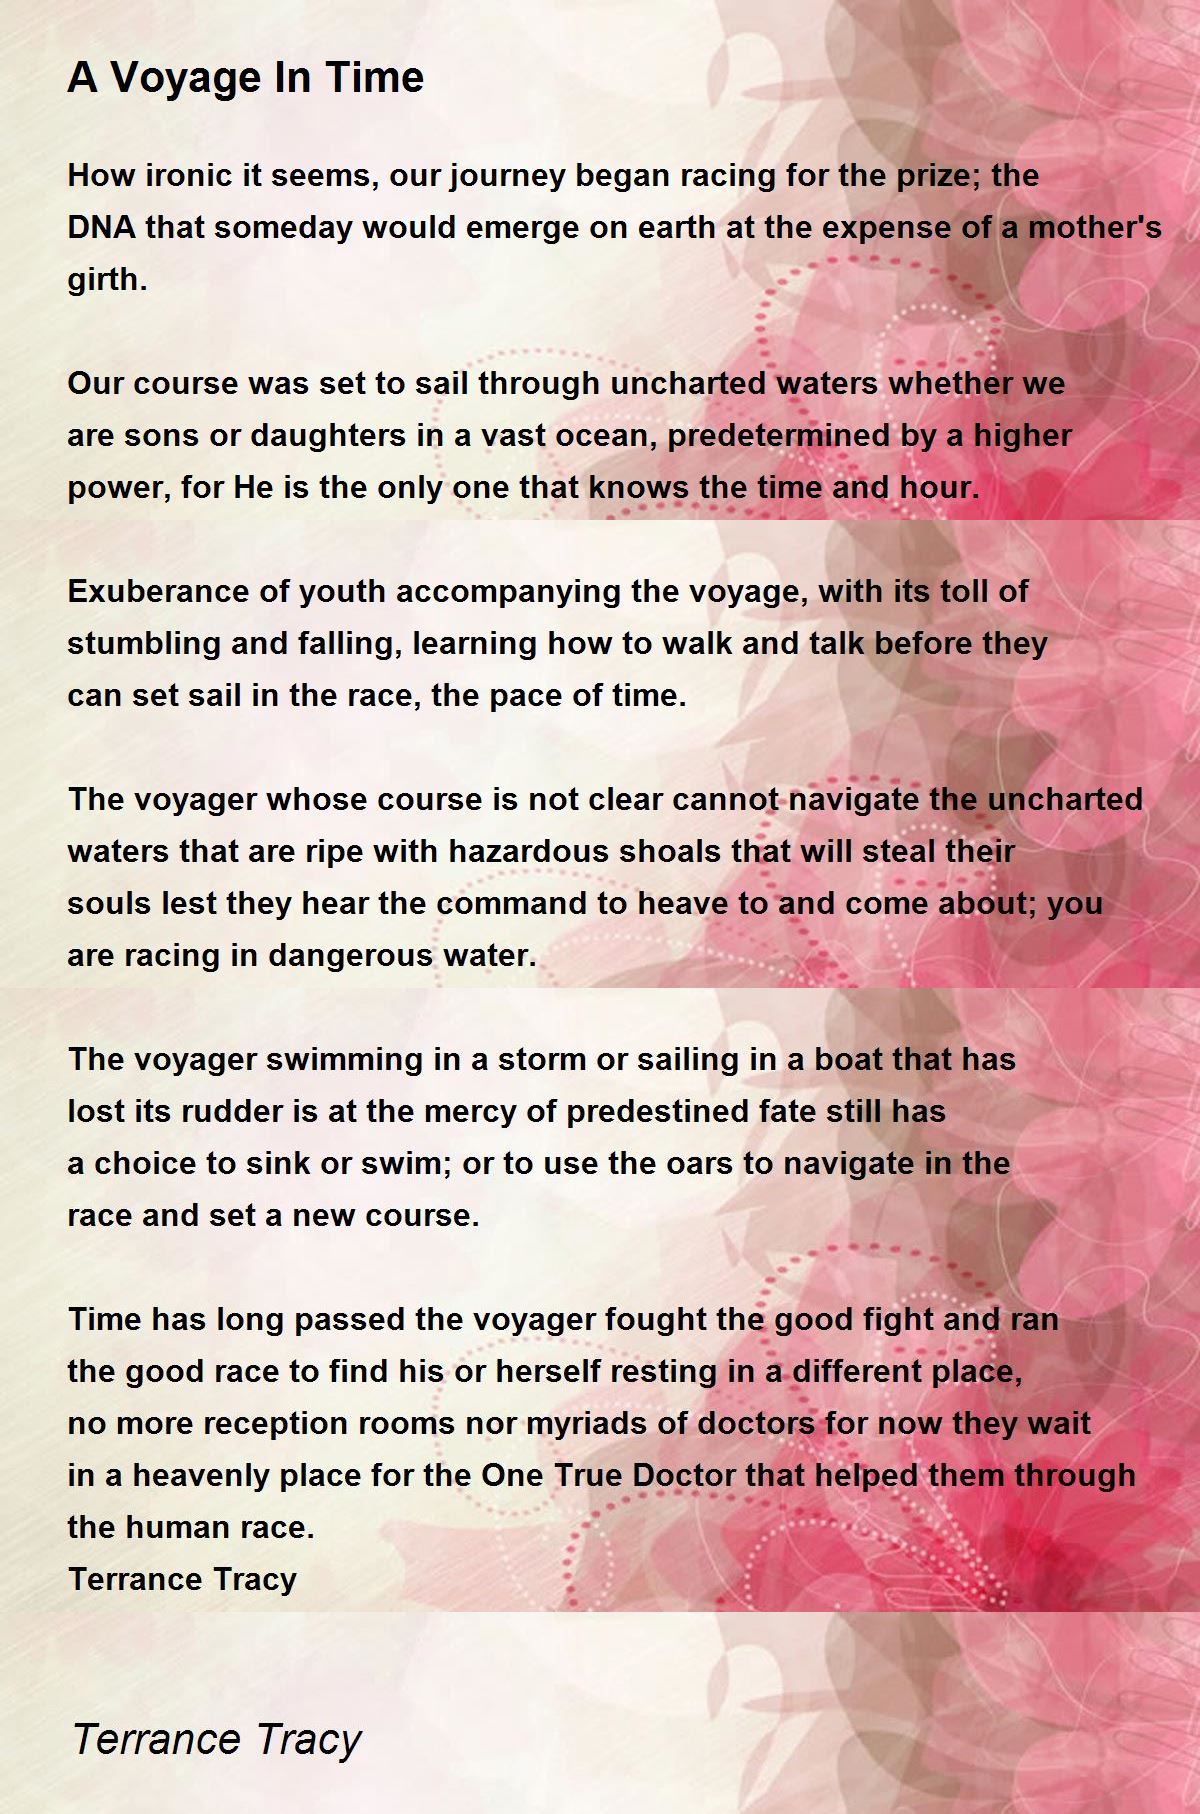 A Voyage In Time - A Voyage In Time Poem by Terrance Tracy